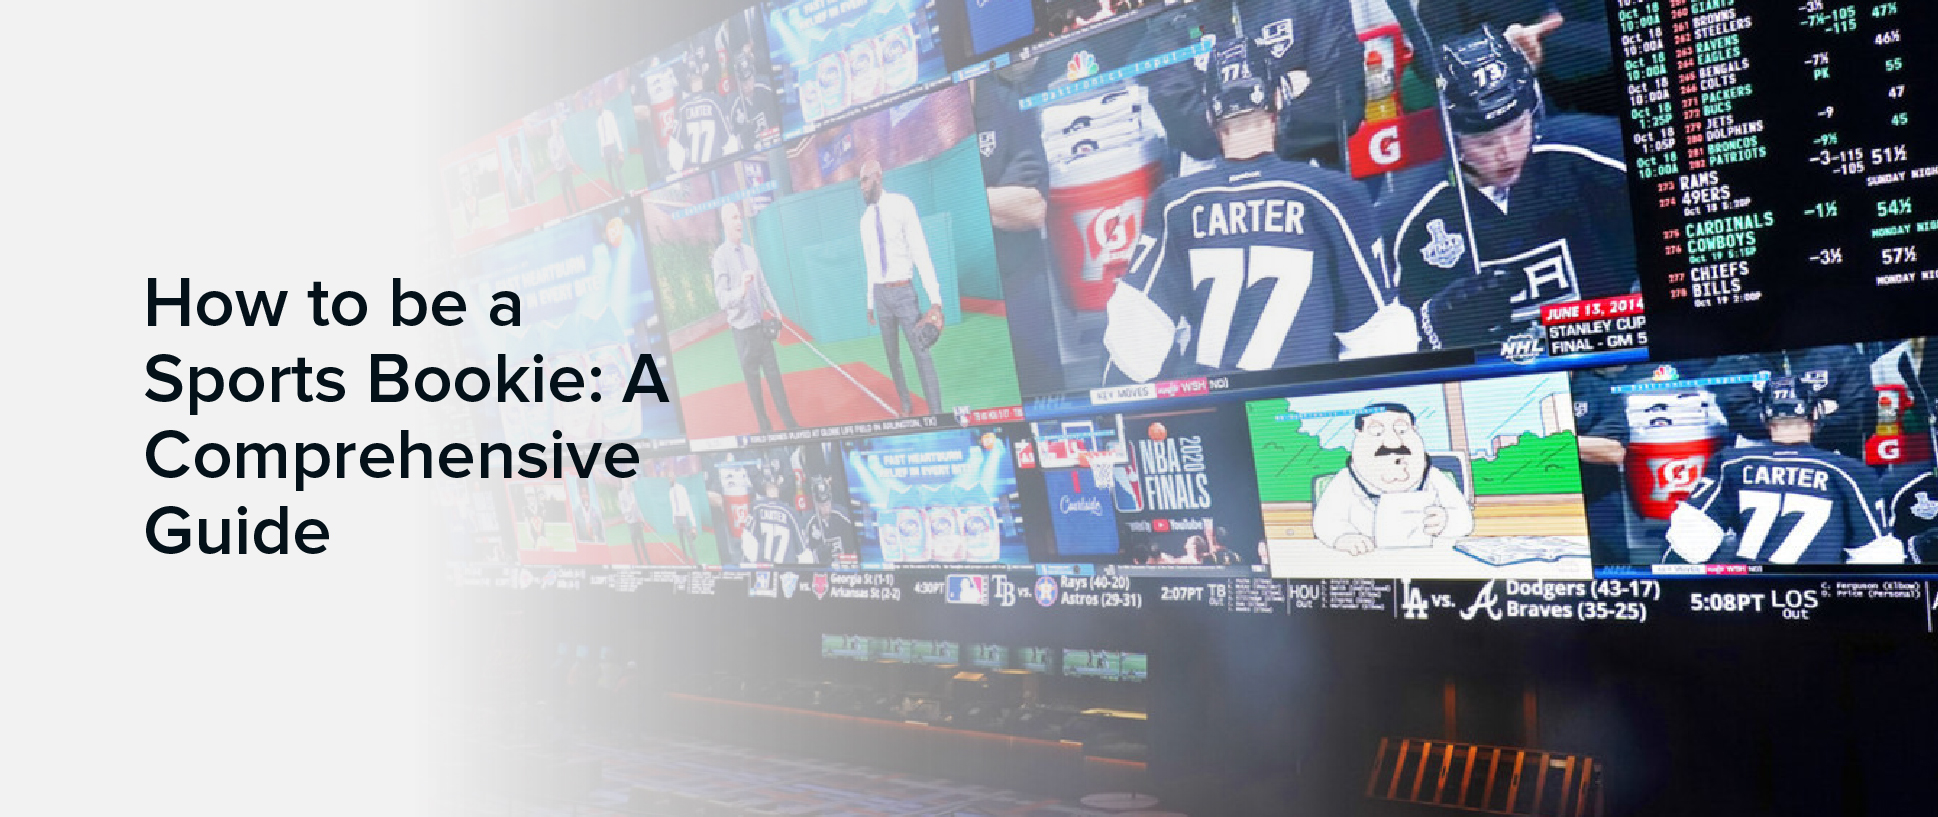 how to be a sports bookie